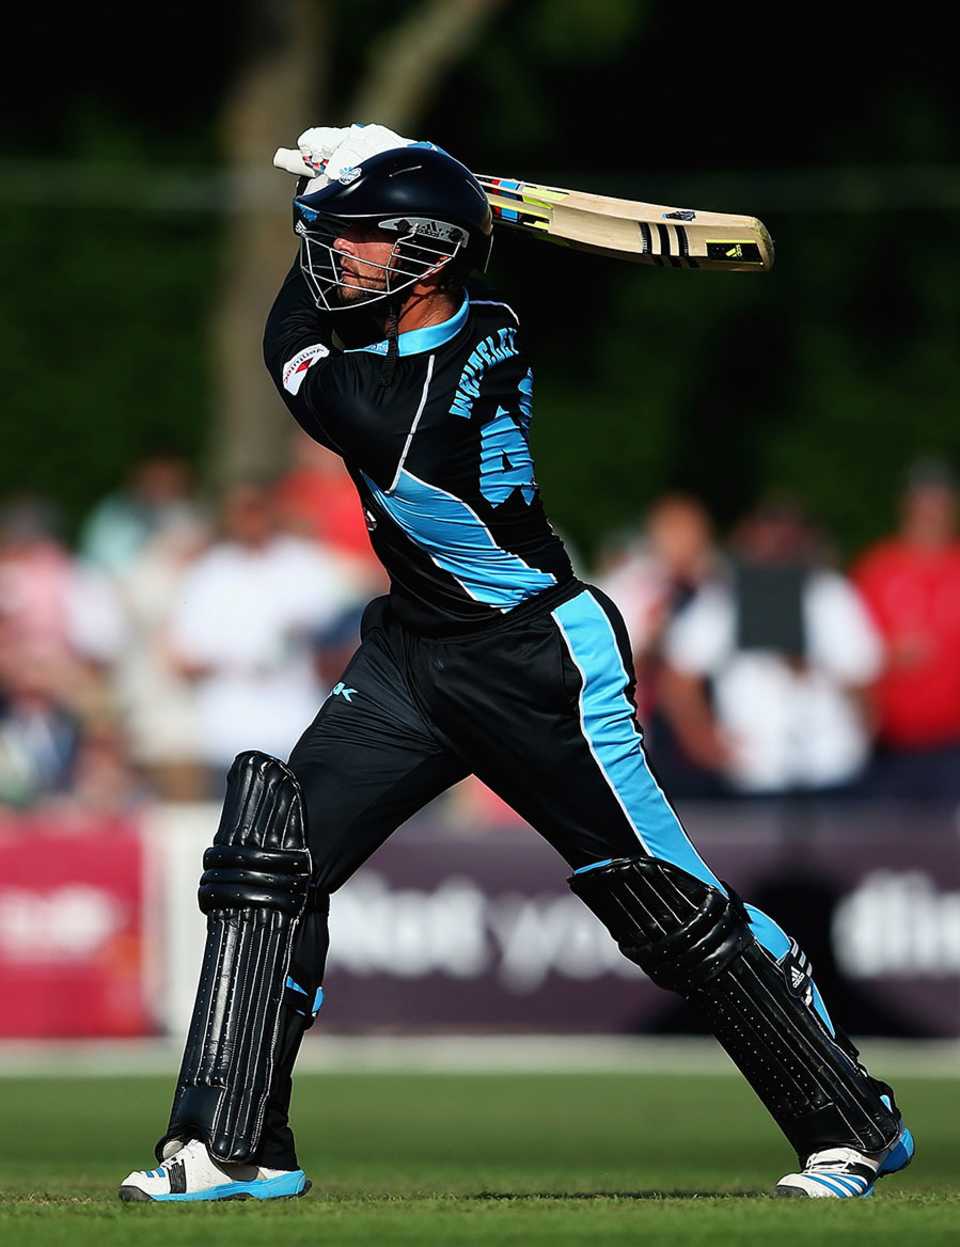 Ross Whitely smashed nine sixes in his 84 in just 38 balls